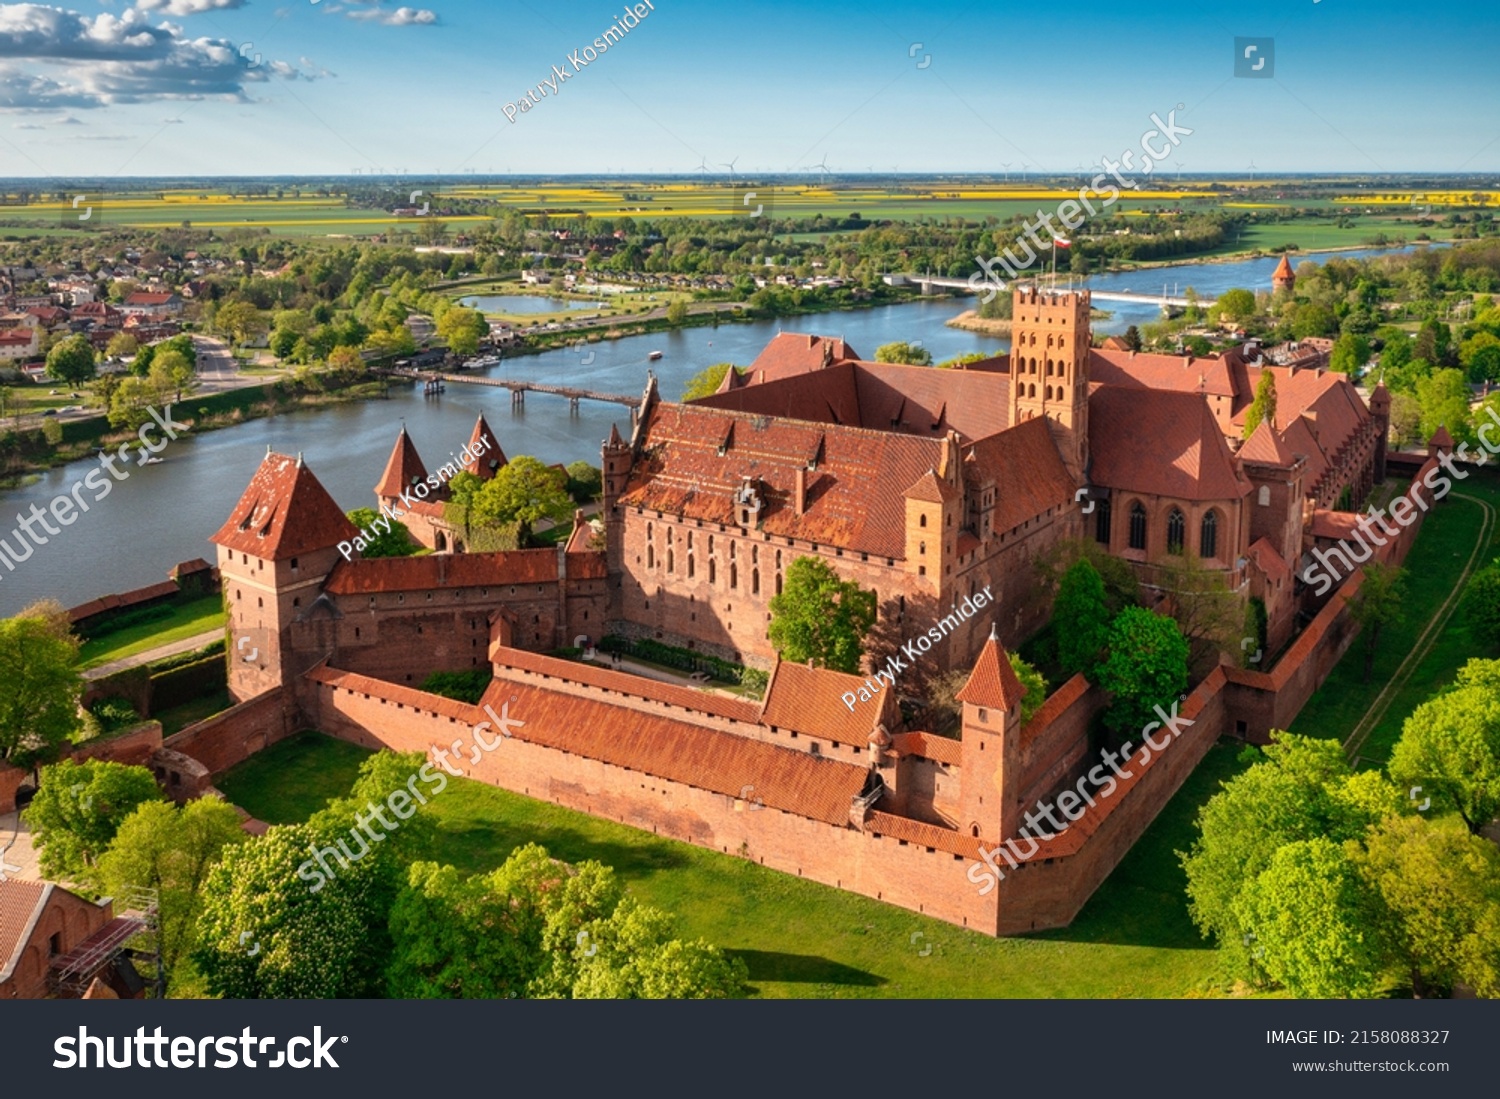 The Castle of the Teutonic Order in Malbork by the Nogat river. Poland #2158088327